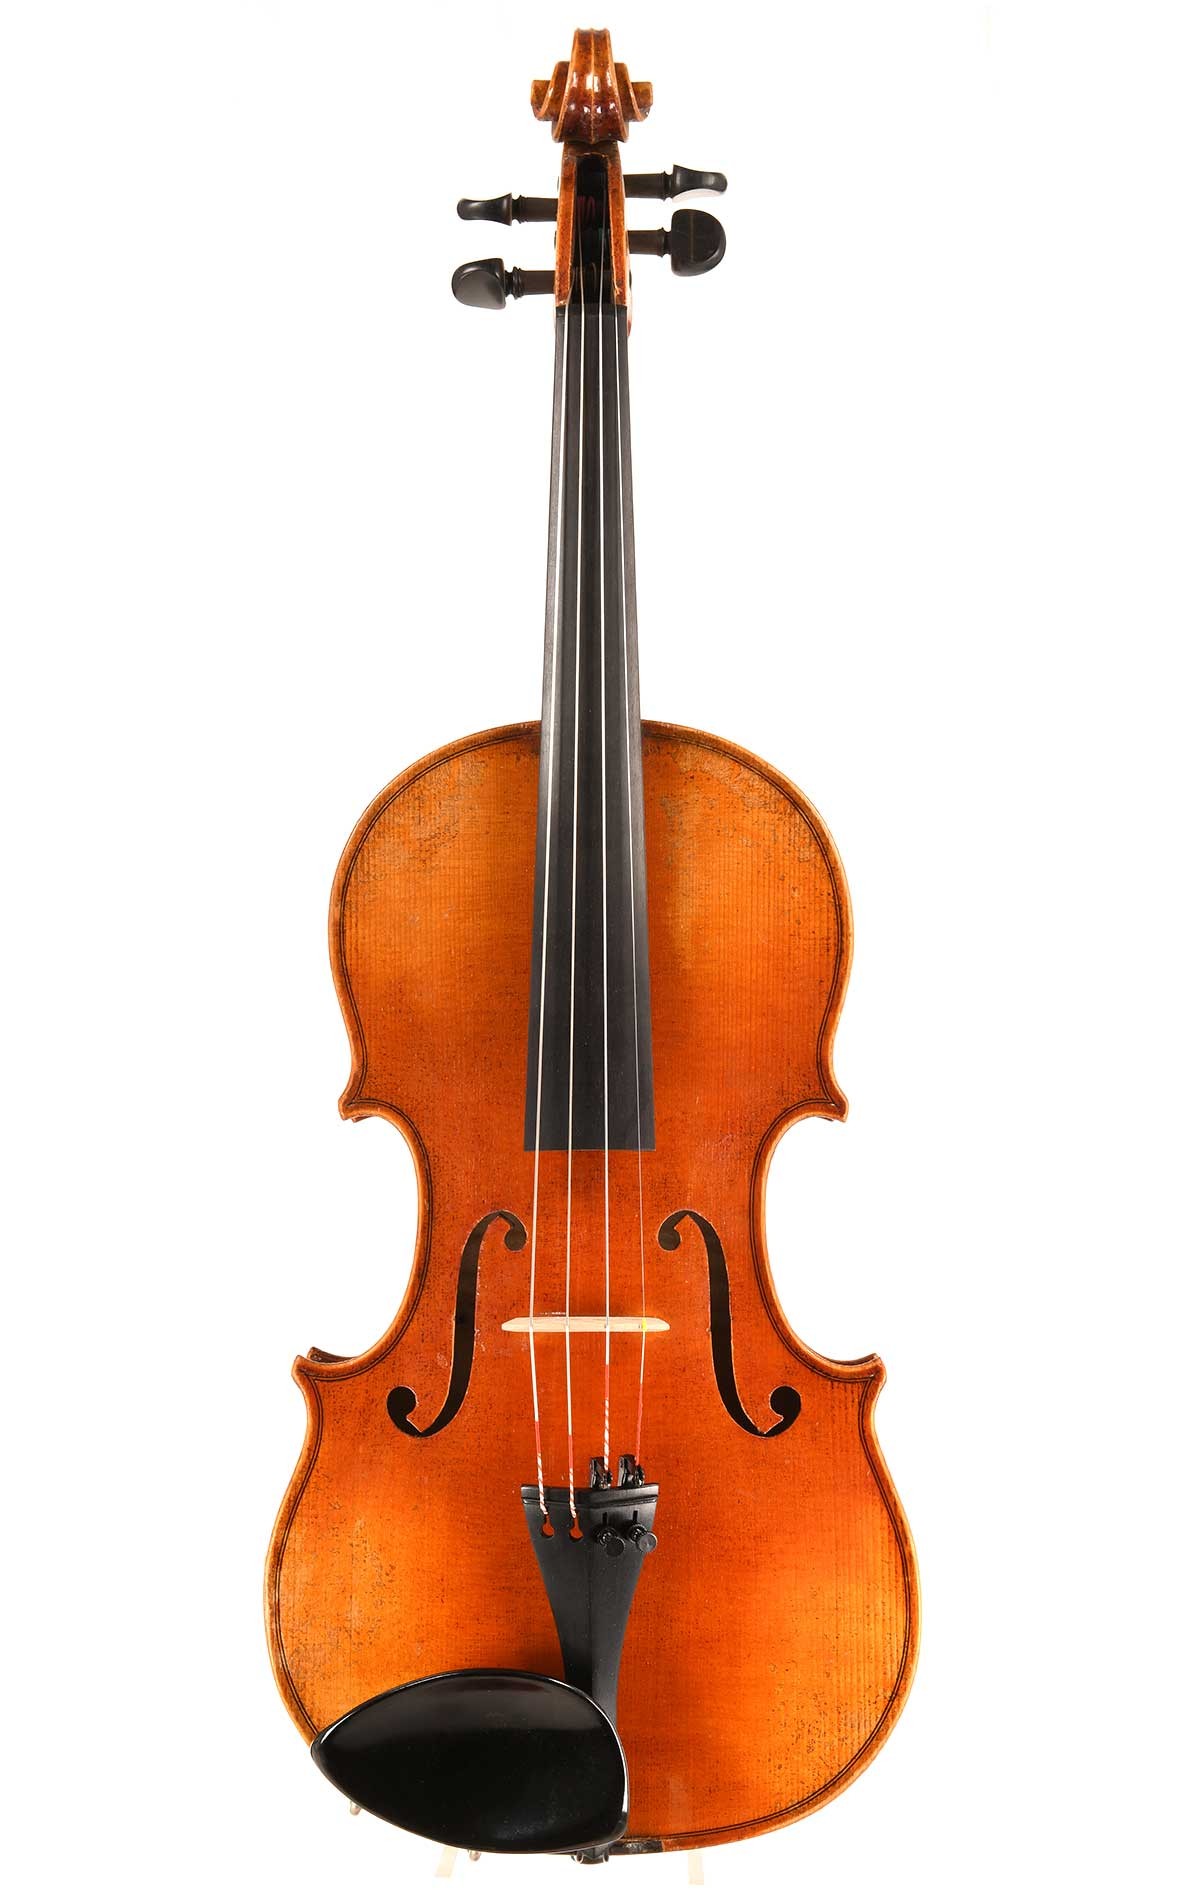 German violin from the 1970s